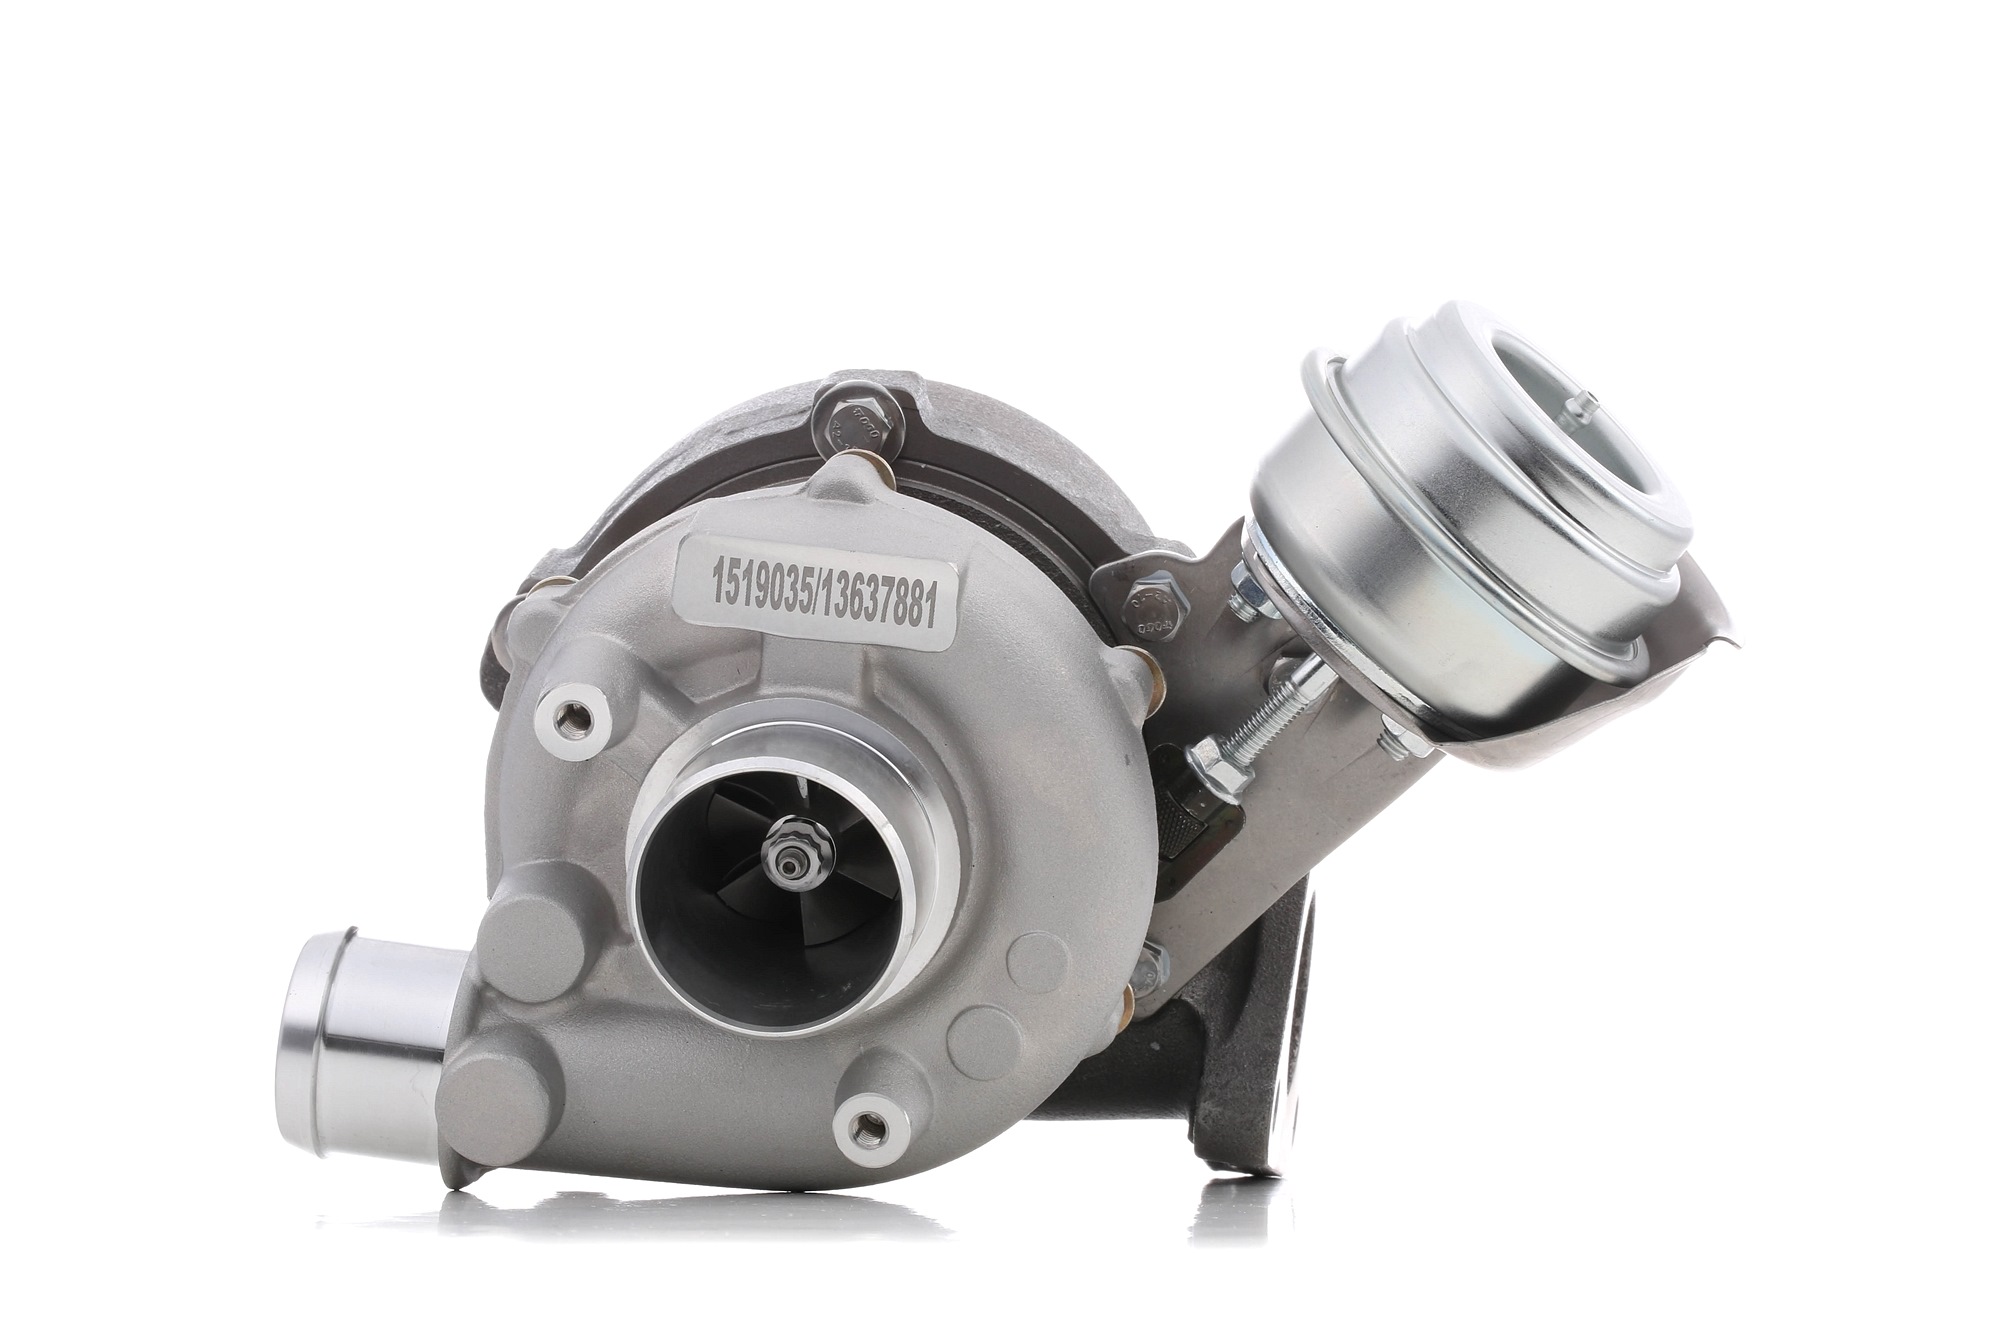 RIDEX 2234C0153 Turbocharger Exhaust Turbocharger, Diesel, Euro 4, Pneumatic, without attachment material